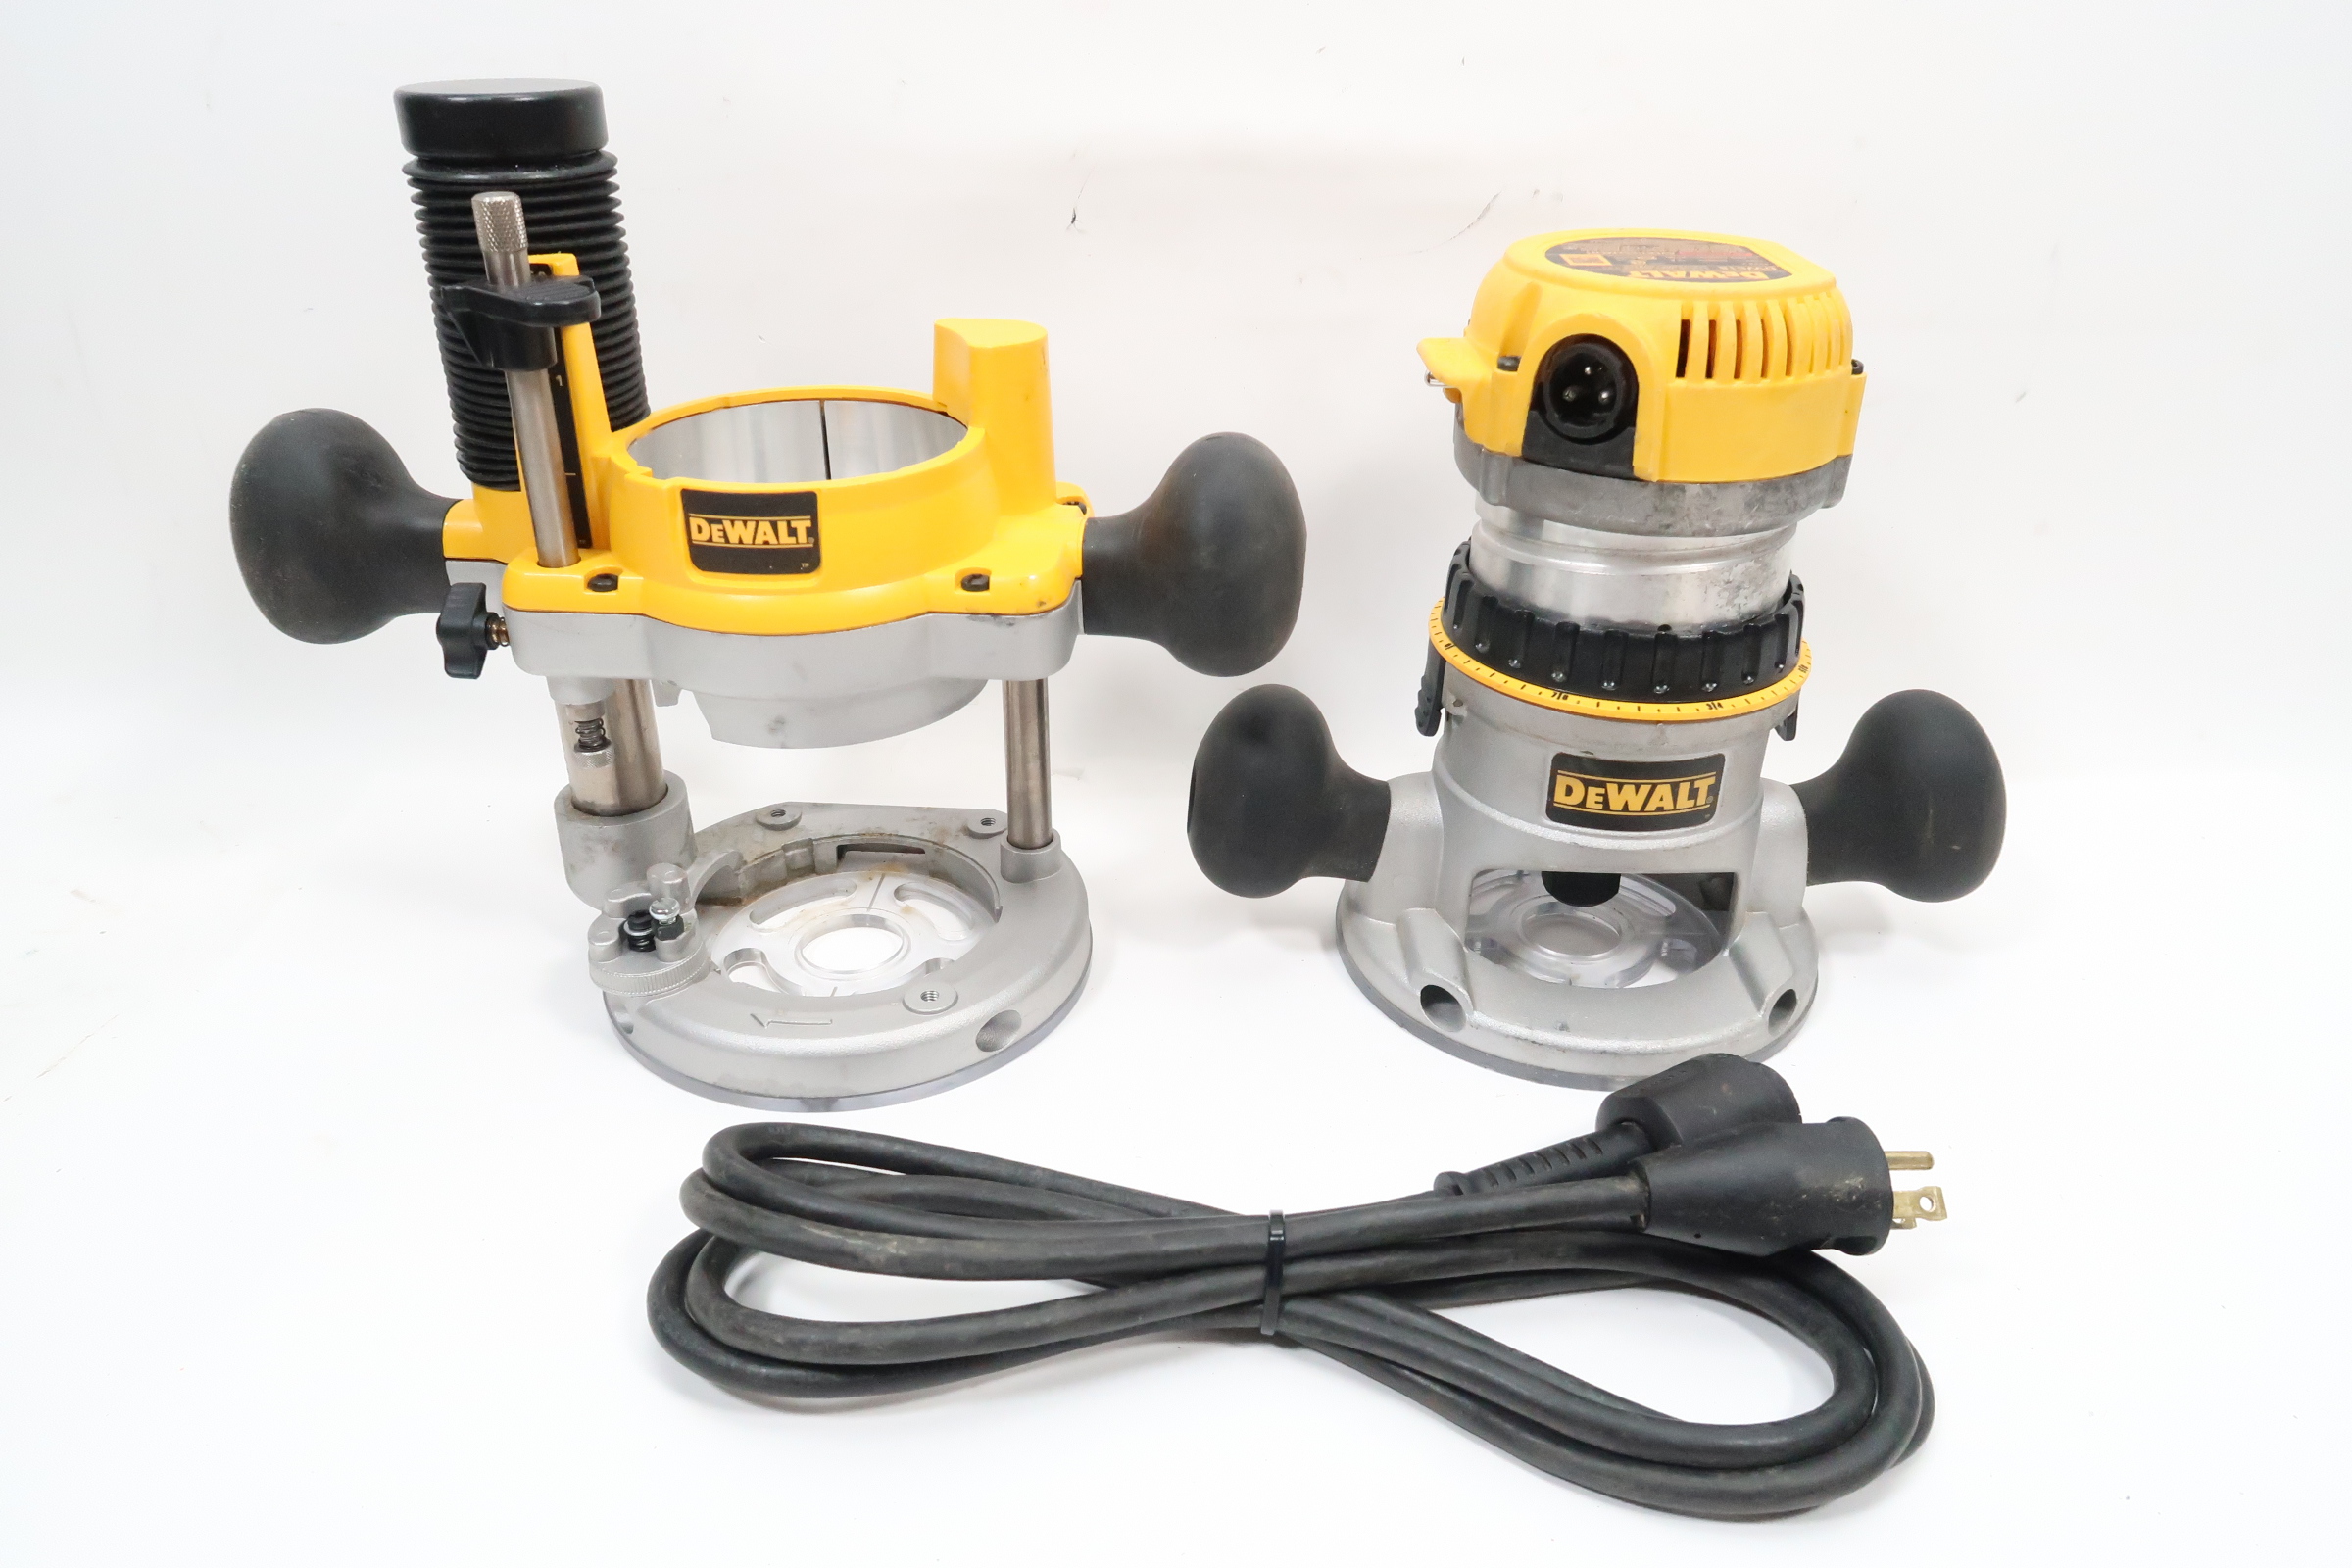 DEWALT Router, Fixed Base, 12-Amp, 24,000 RPM Variable Speed Trigger, 2-1 4HP, Corded (DW618) Yellow - 3